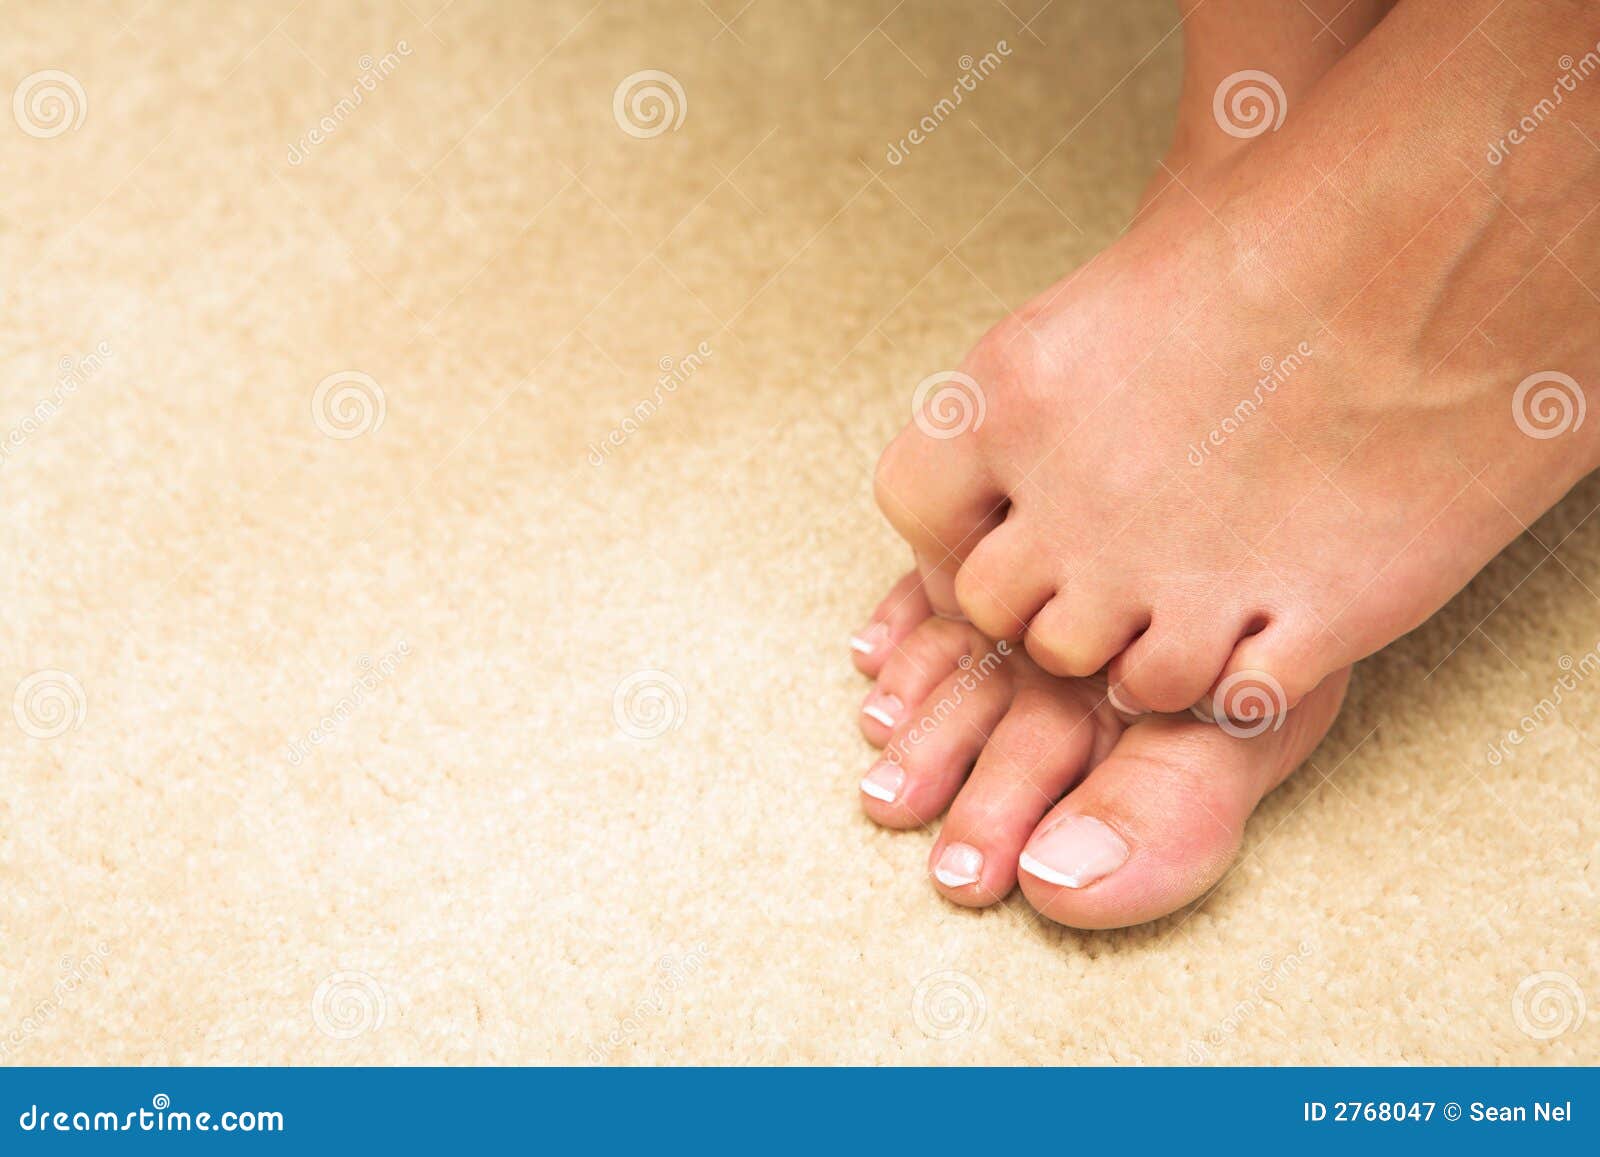 woman hiding toes